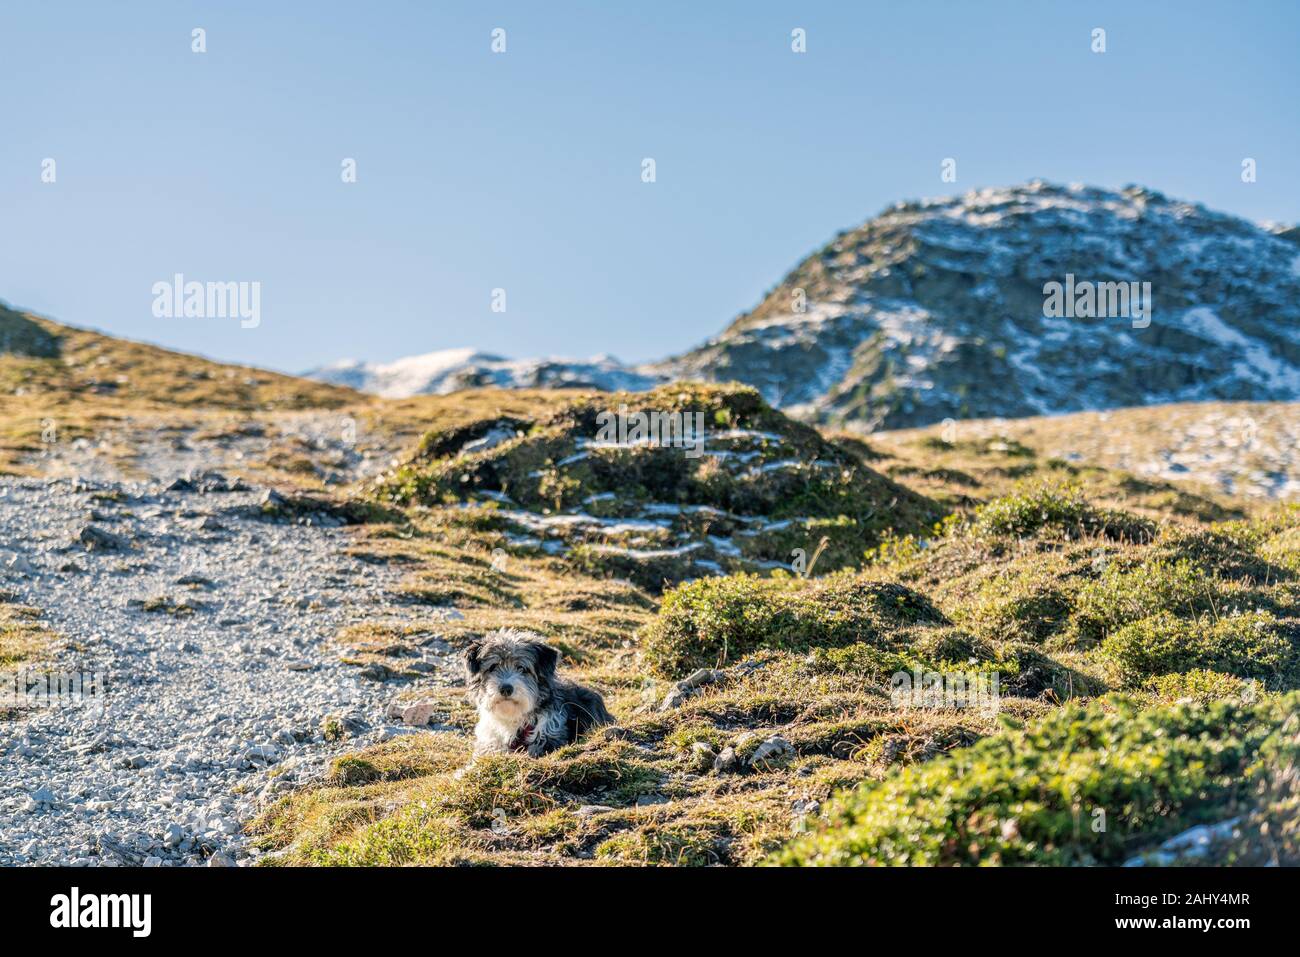 A black and white dog laying on a gravel path on a mountain hiking path in the austrian Alps near the Kemater Alm and Seejoechl. Stock Photo